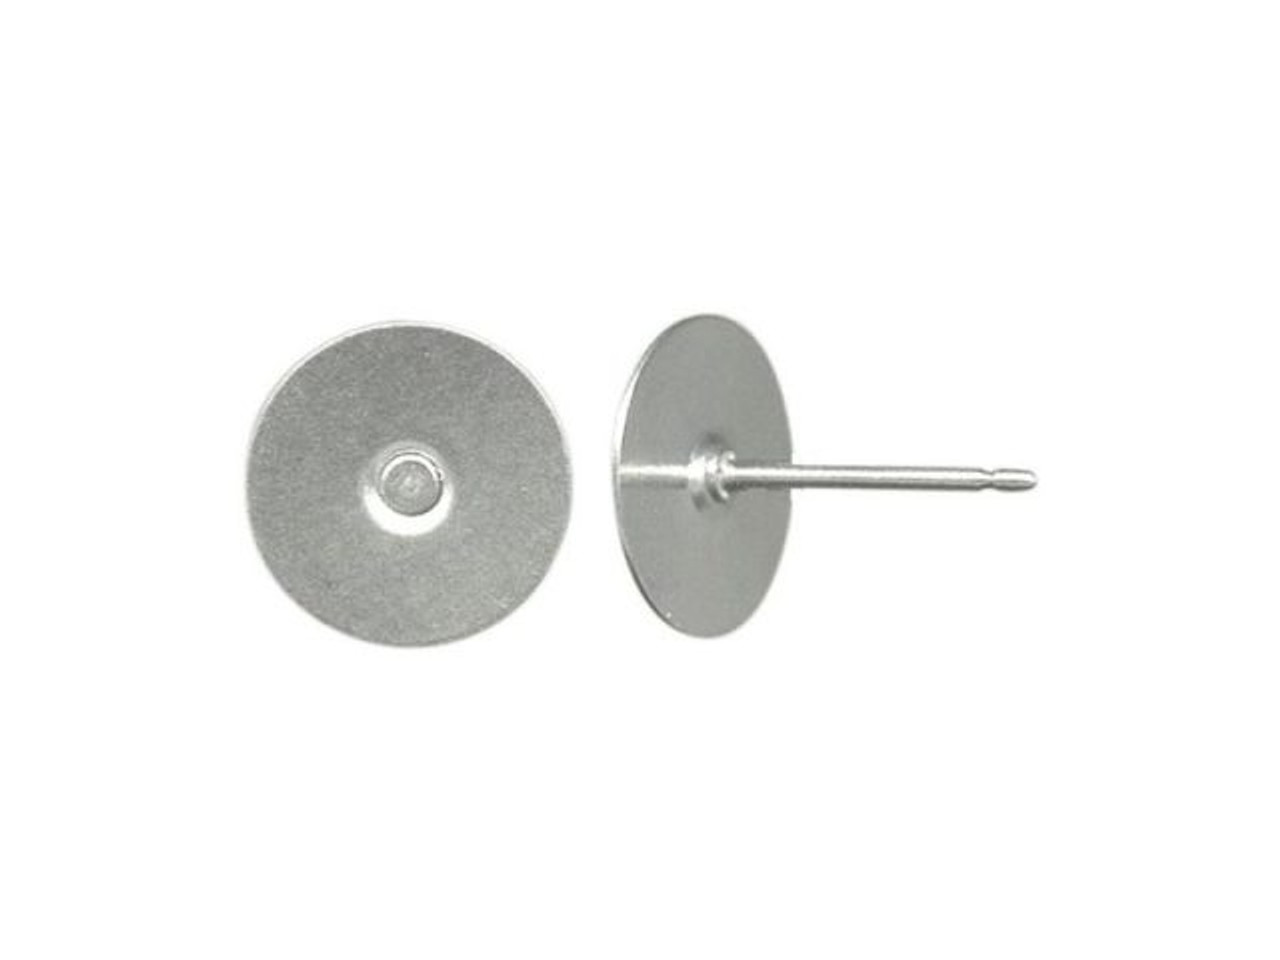 Titanium Earring Post Finding w 4mm Stainless Steel Flat Pad - 11mm Post  (100 pcs)